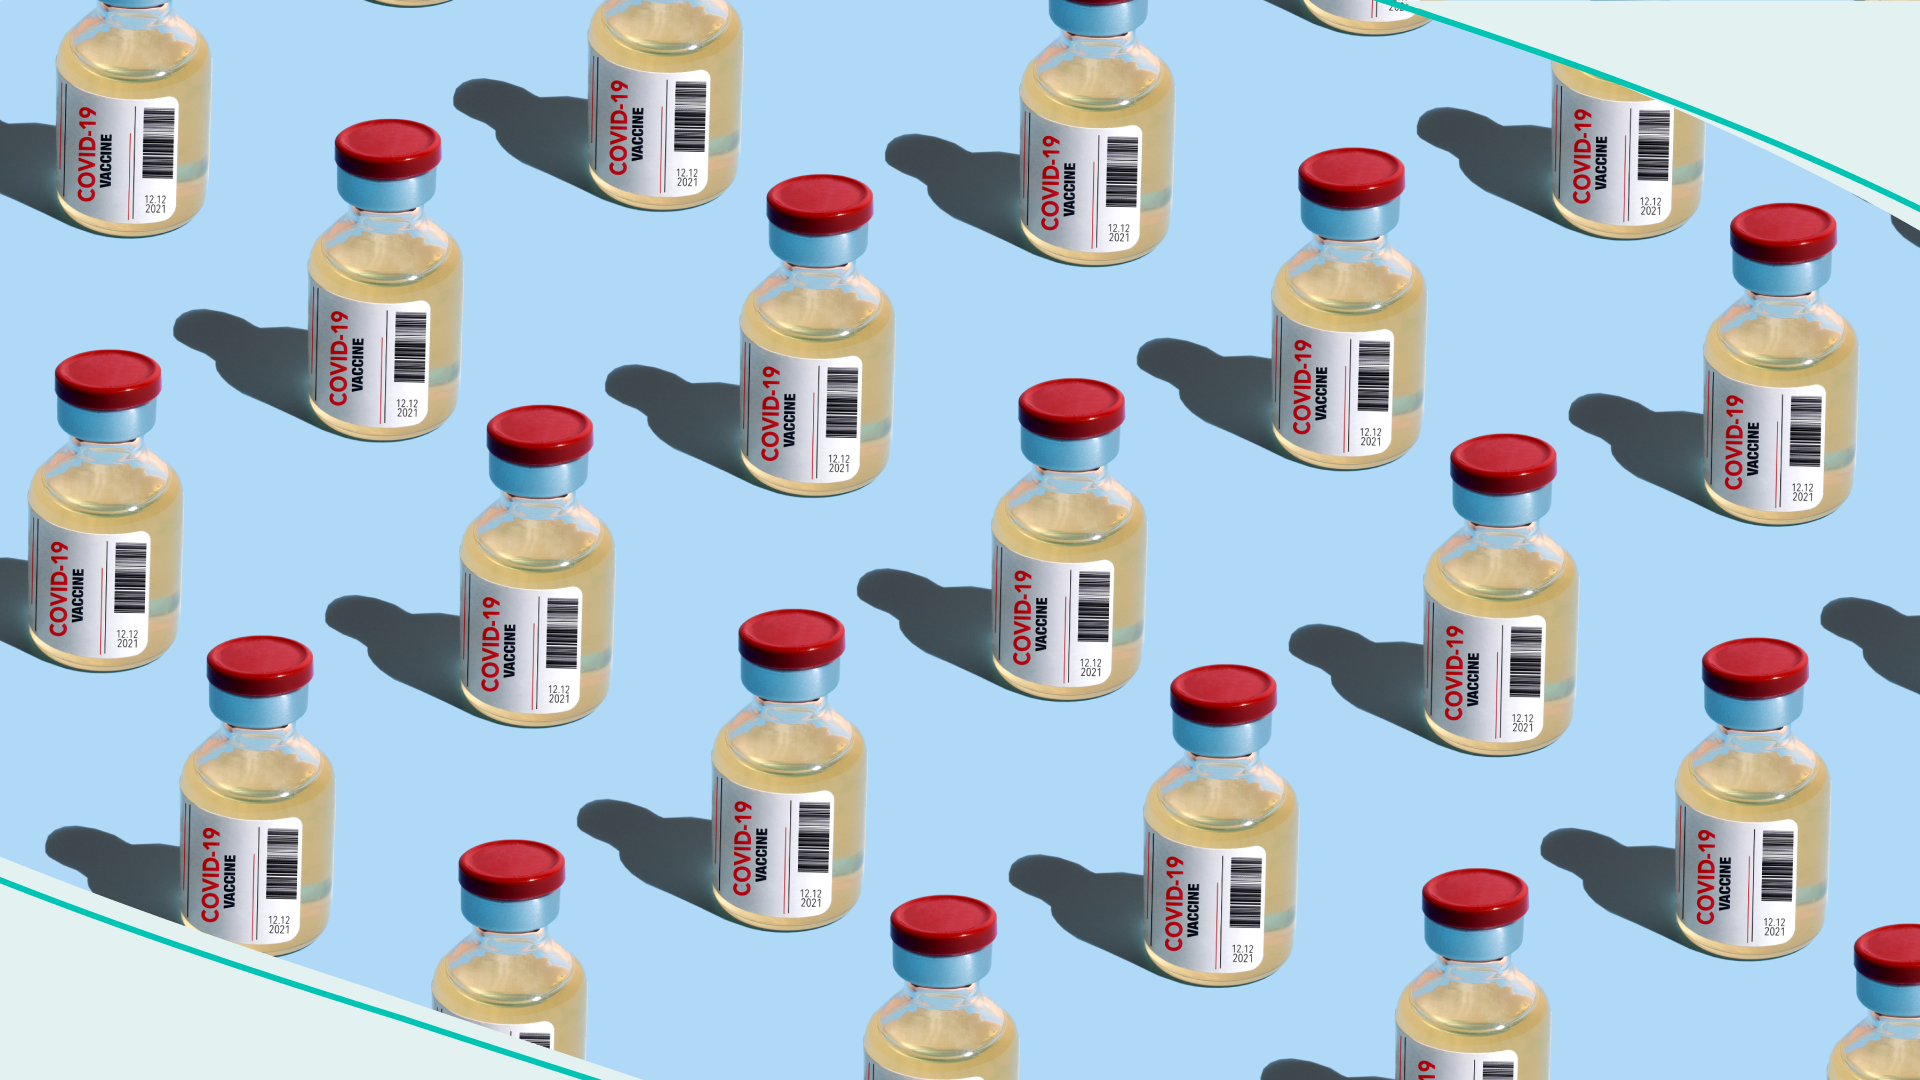 Repeated vials with covid-19 vaccine on the blue background - stock photo